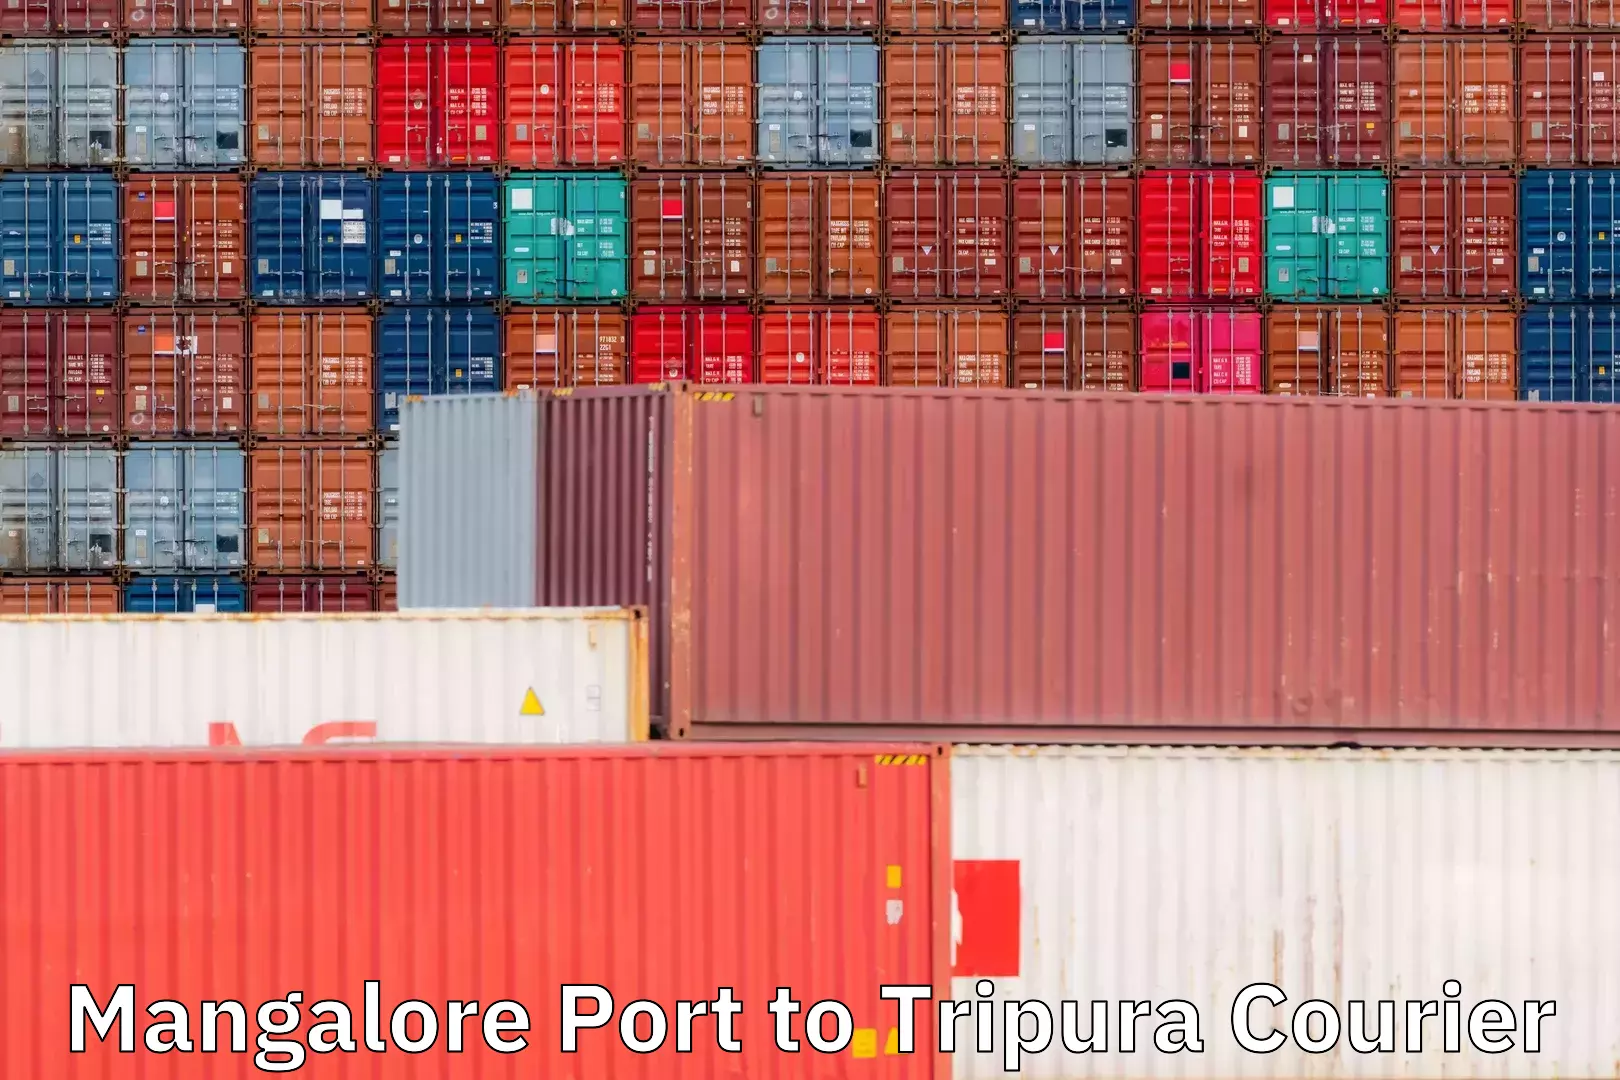 Efficient courier operations Mangalore Port to Tripura